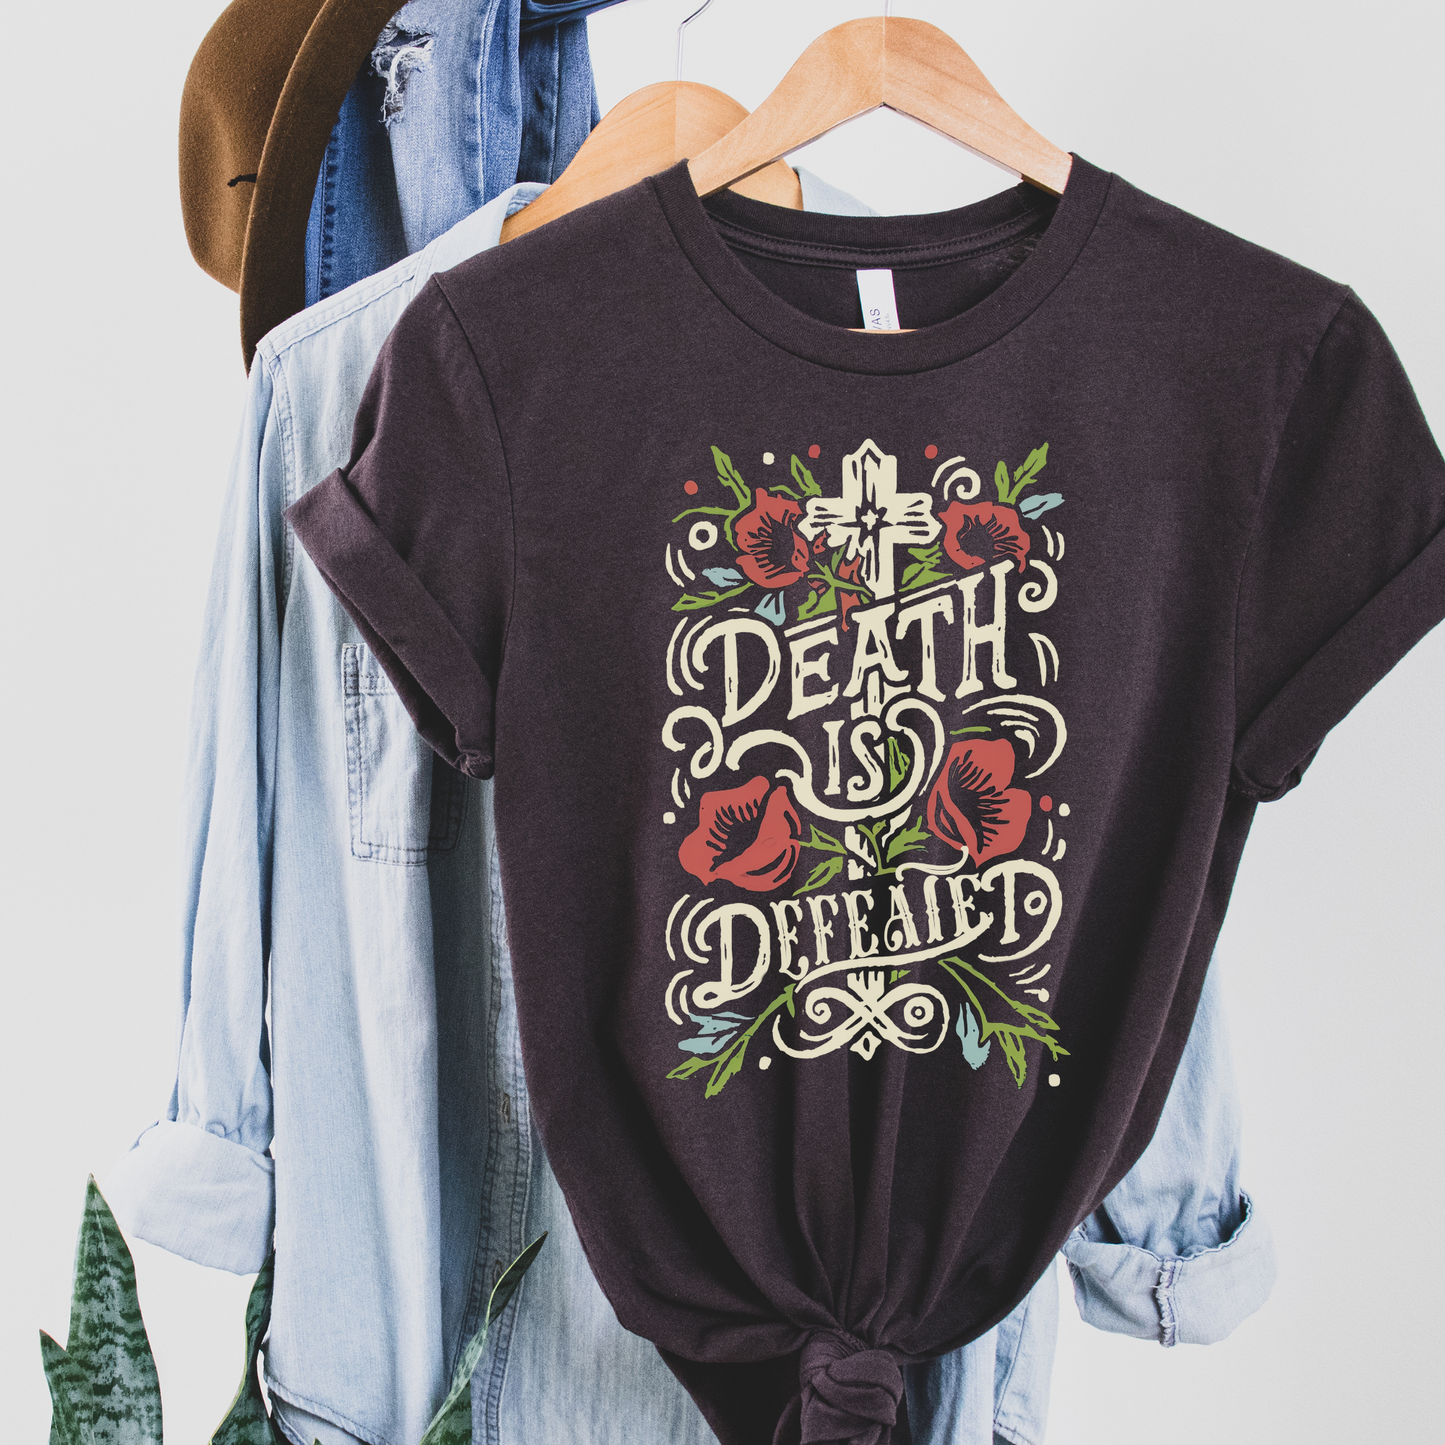 Death is Defeated Graphic Tee